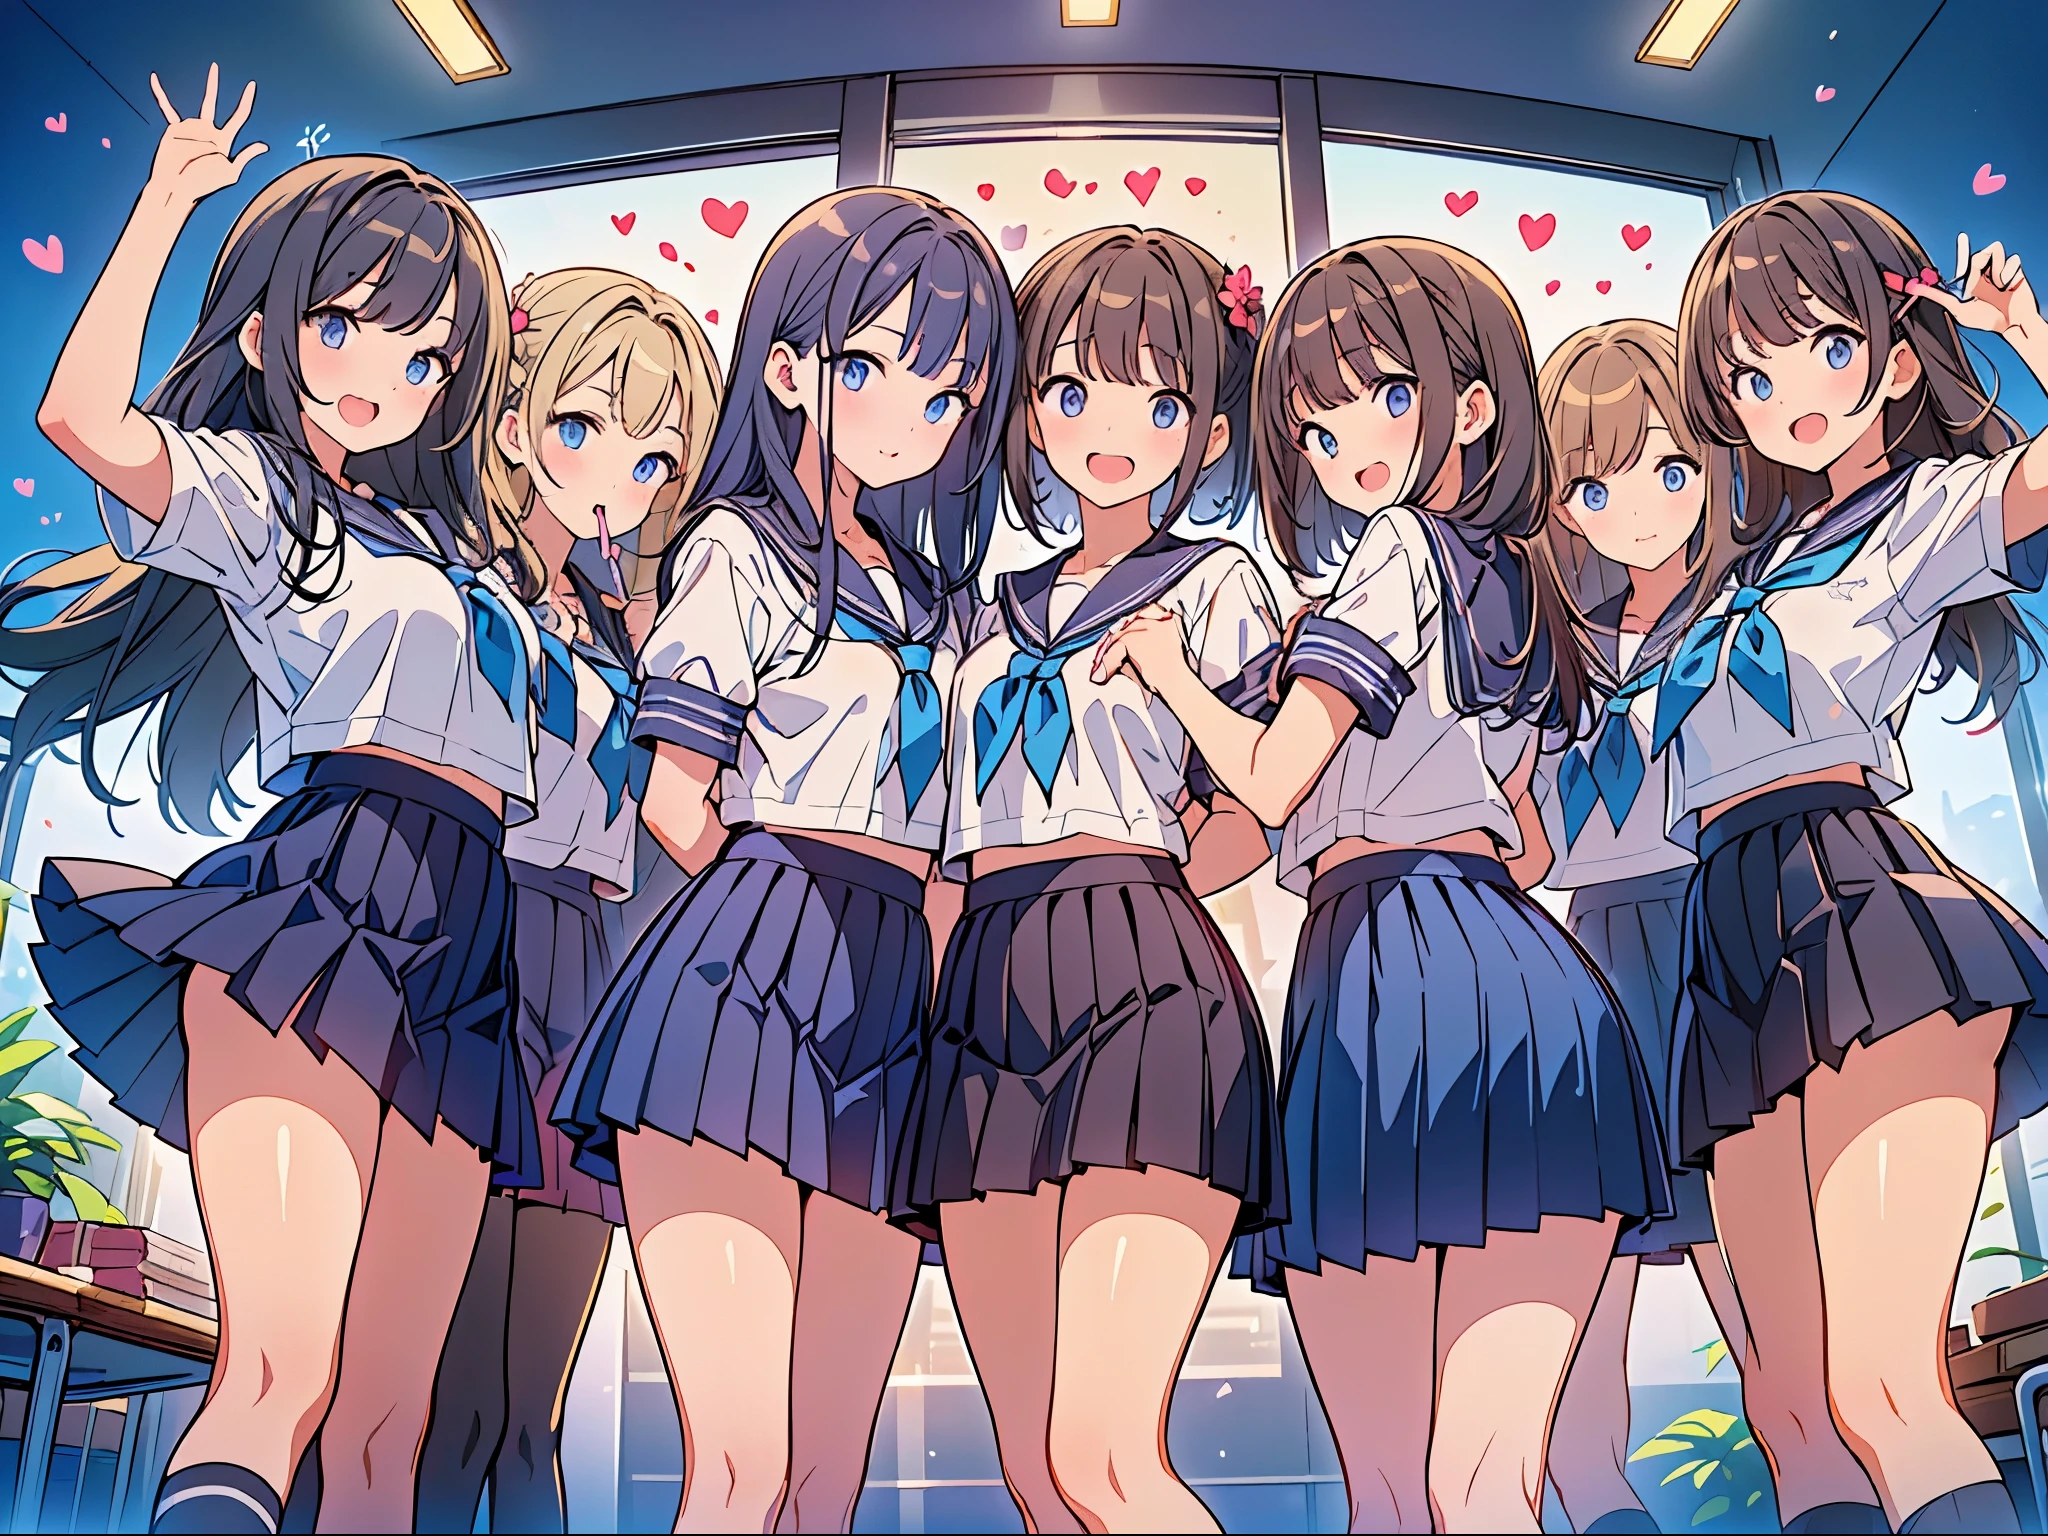 (masterpiece: 1.2, highest quality, master piece, clearer image), (vivid colors), ((Takes clear pictures from far away)), (multiple girls), (Harem), (school classmates), (((School uniforms all have the same design))), (((Everyone has the same dark blue skirt))), ((16 years old)), ((prostitution婦)), (prostitution宿, on the bed), (cute japanese((6 girls))), (((young child&#39;s face))), ((group shot)), (group selfie), wide angle, soft light, ((((Laugh with your mouth wide open)))), (slightly larger breasts), ((prostitution)), (lure), ((Viewers love it)), (((A lot of hearts are flying))),